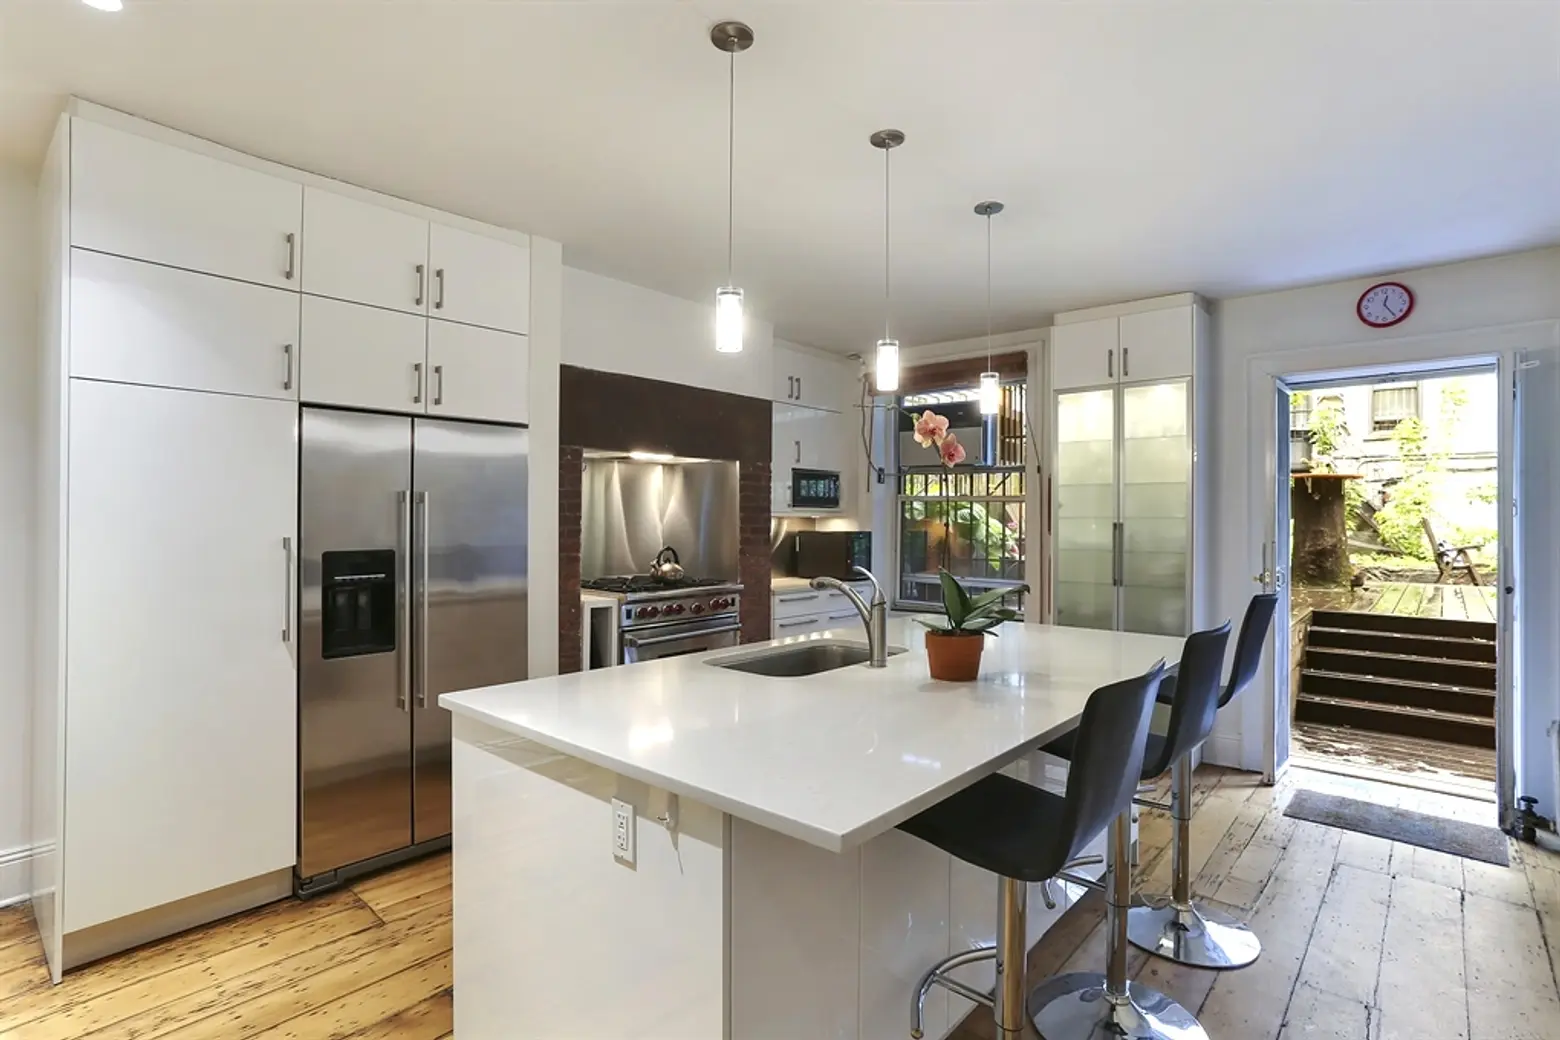 217 2nd Ave, Peter Marino kitchen, East Village condo with gardens